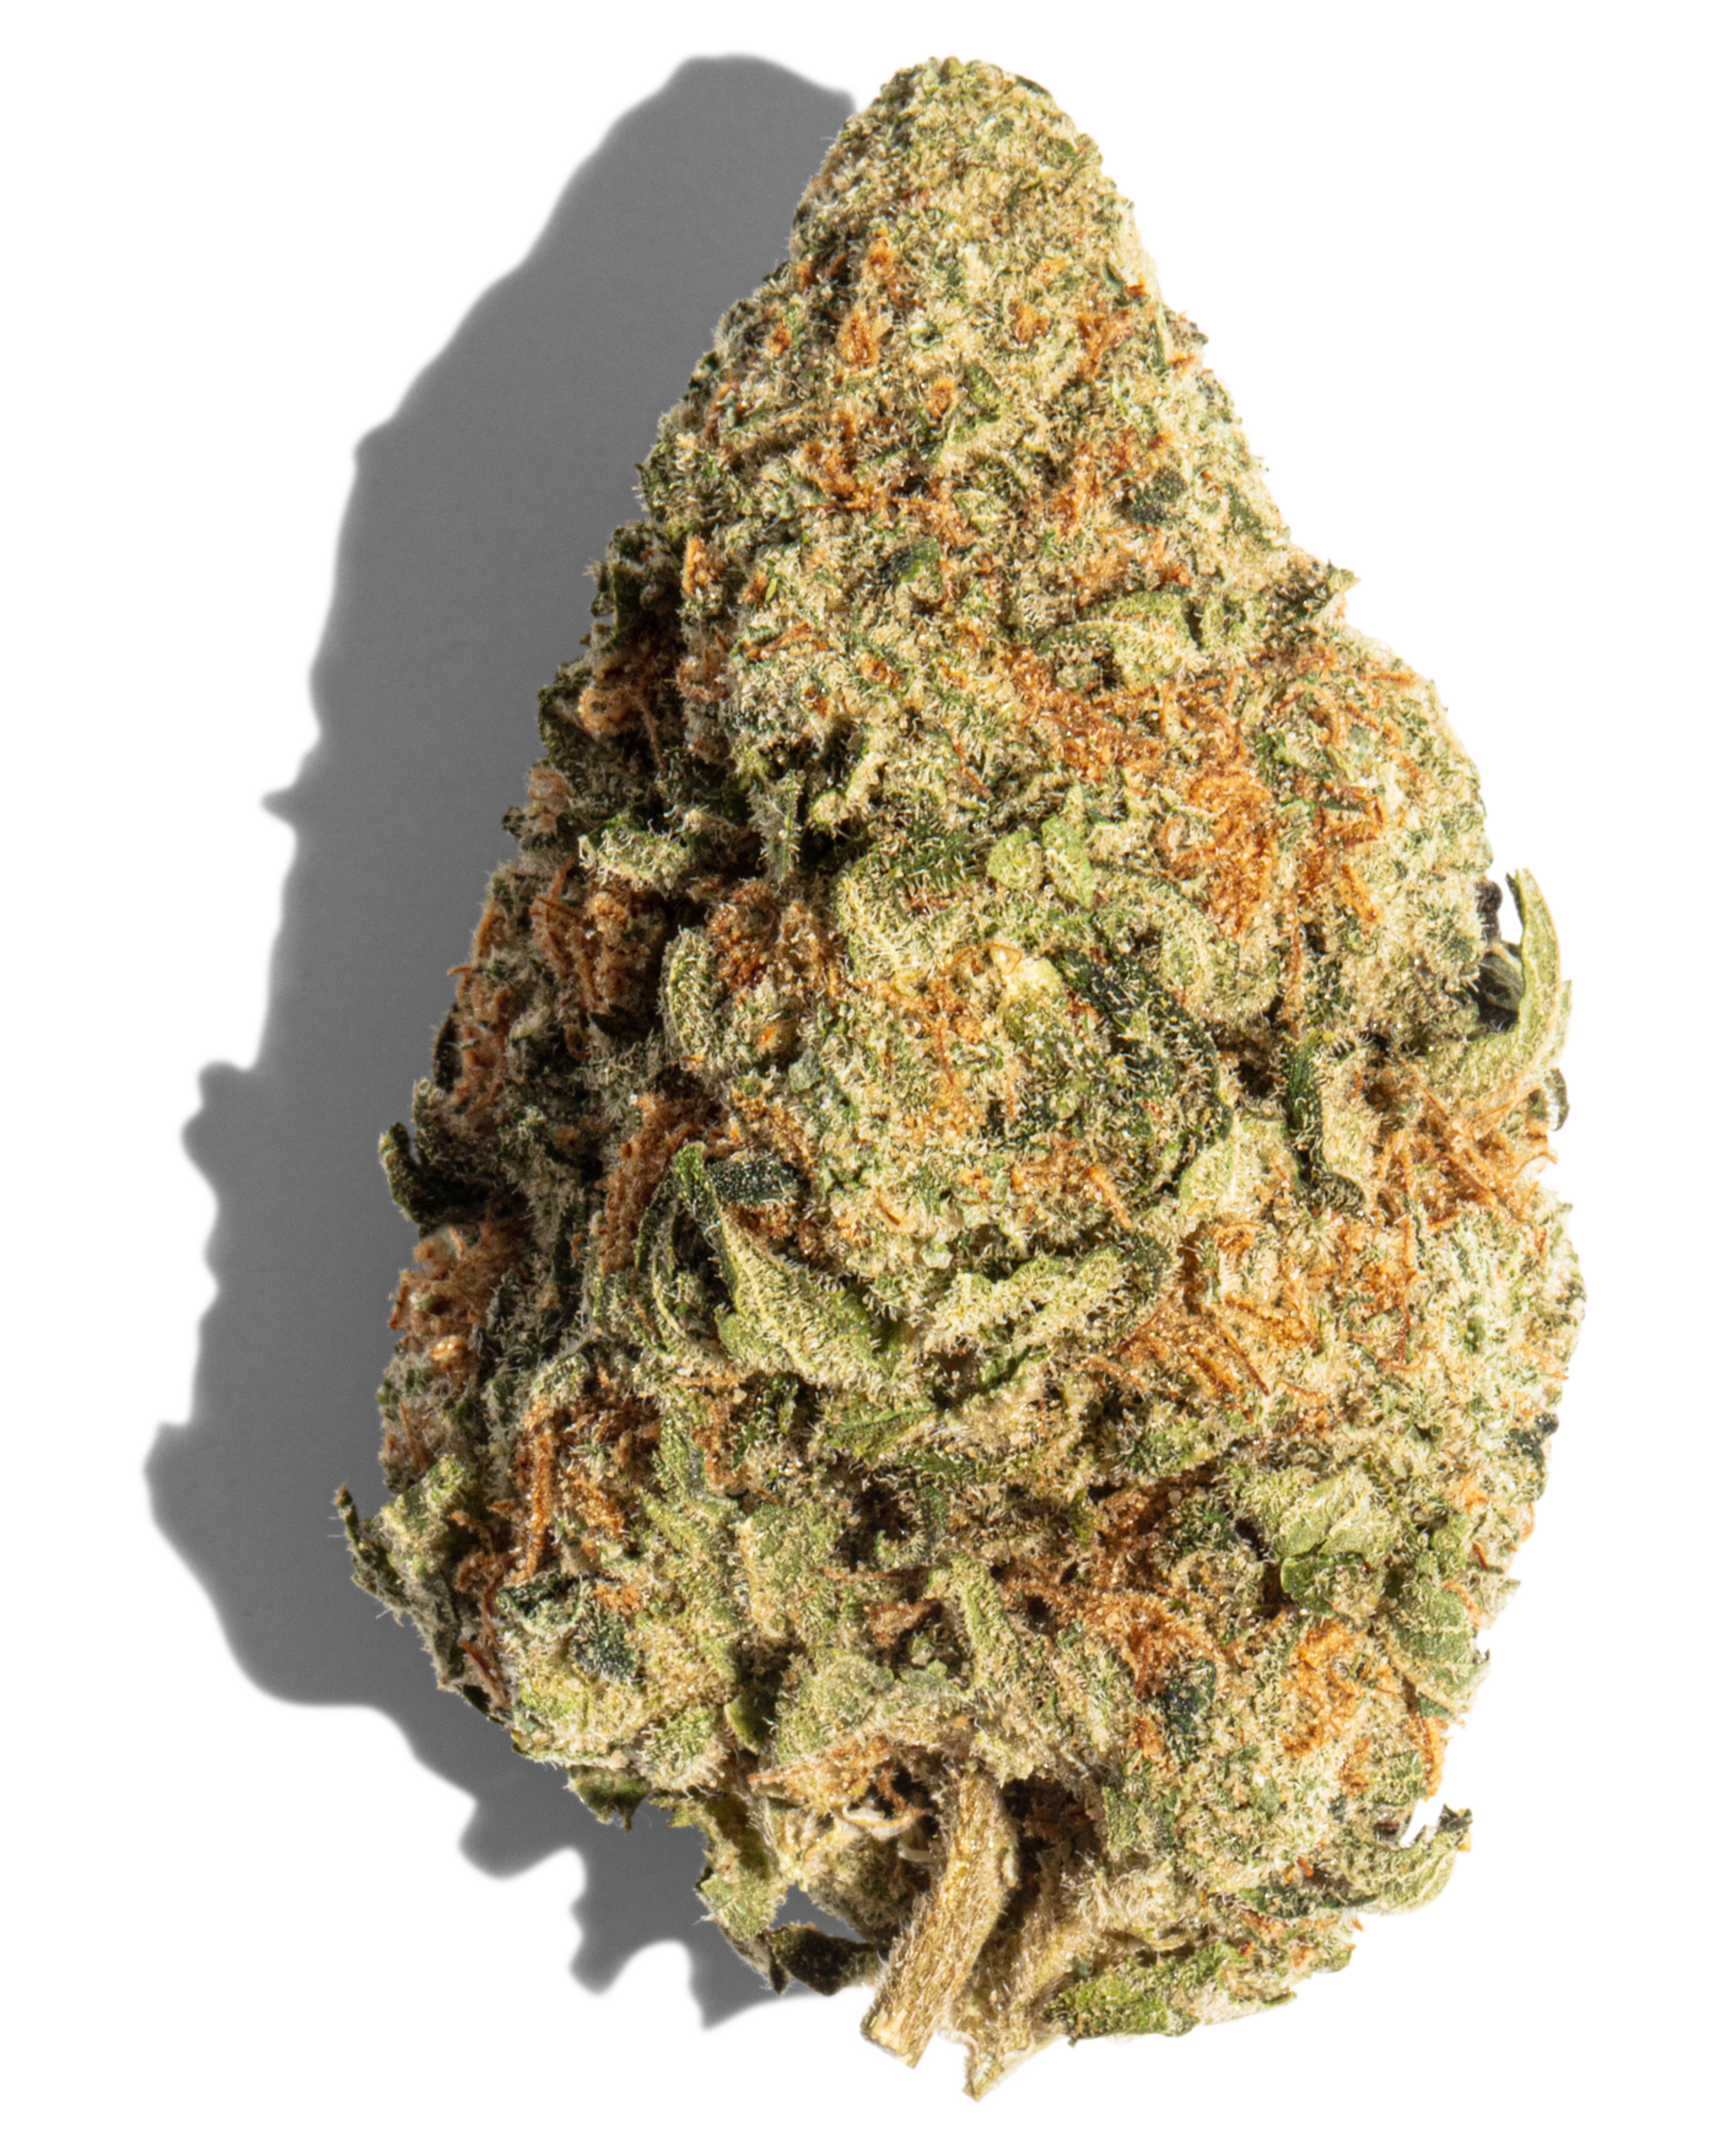 Pineapple Express Cultivator's Collection Flower, 1 of 1